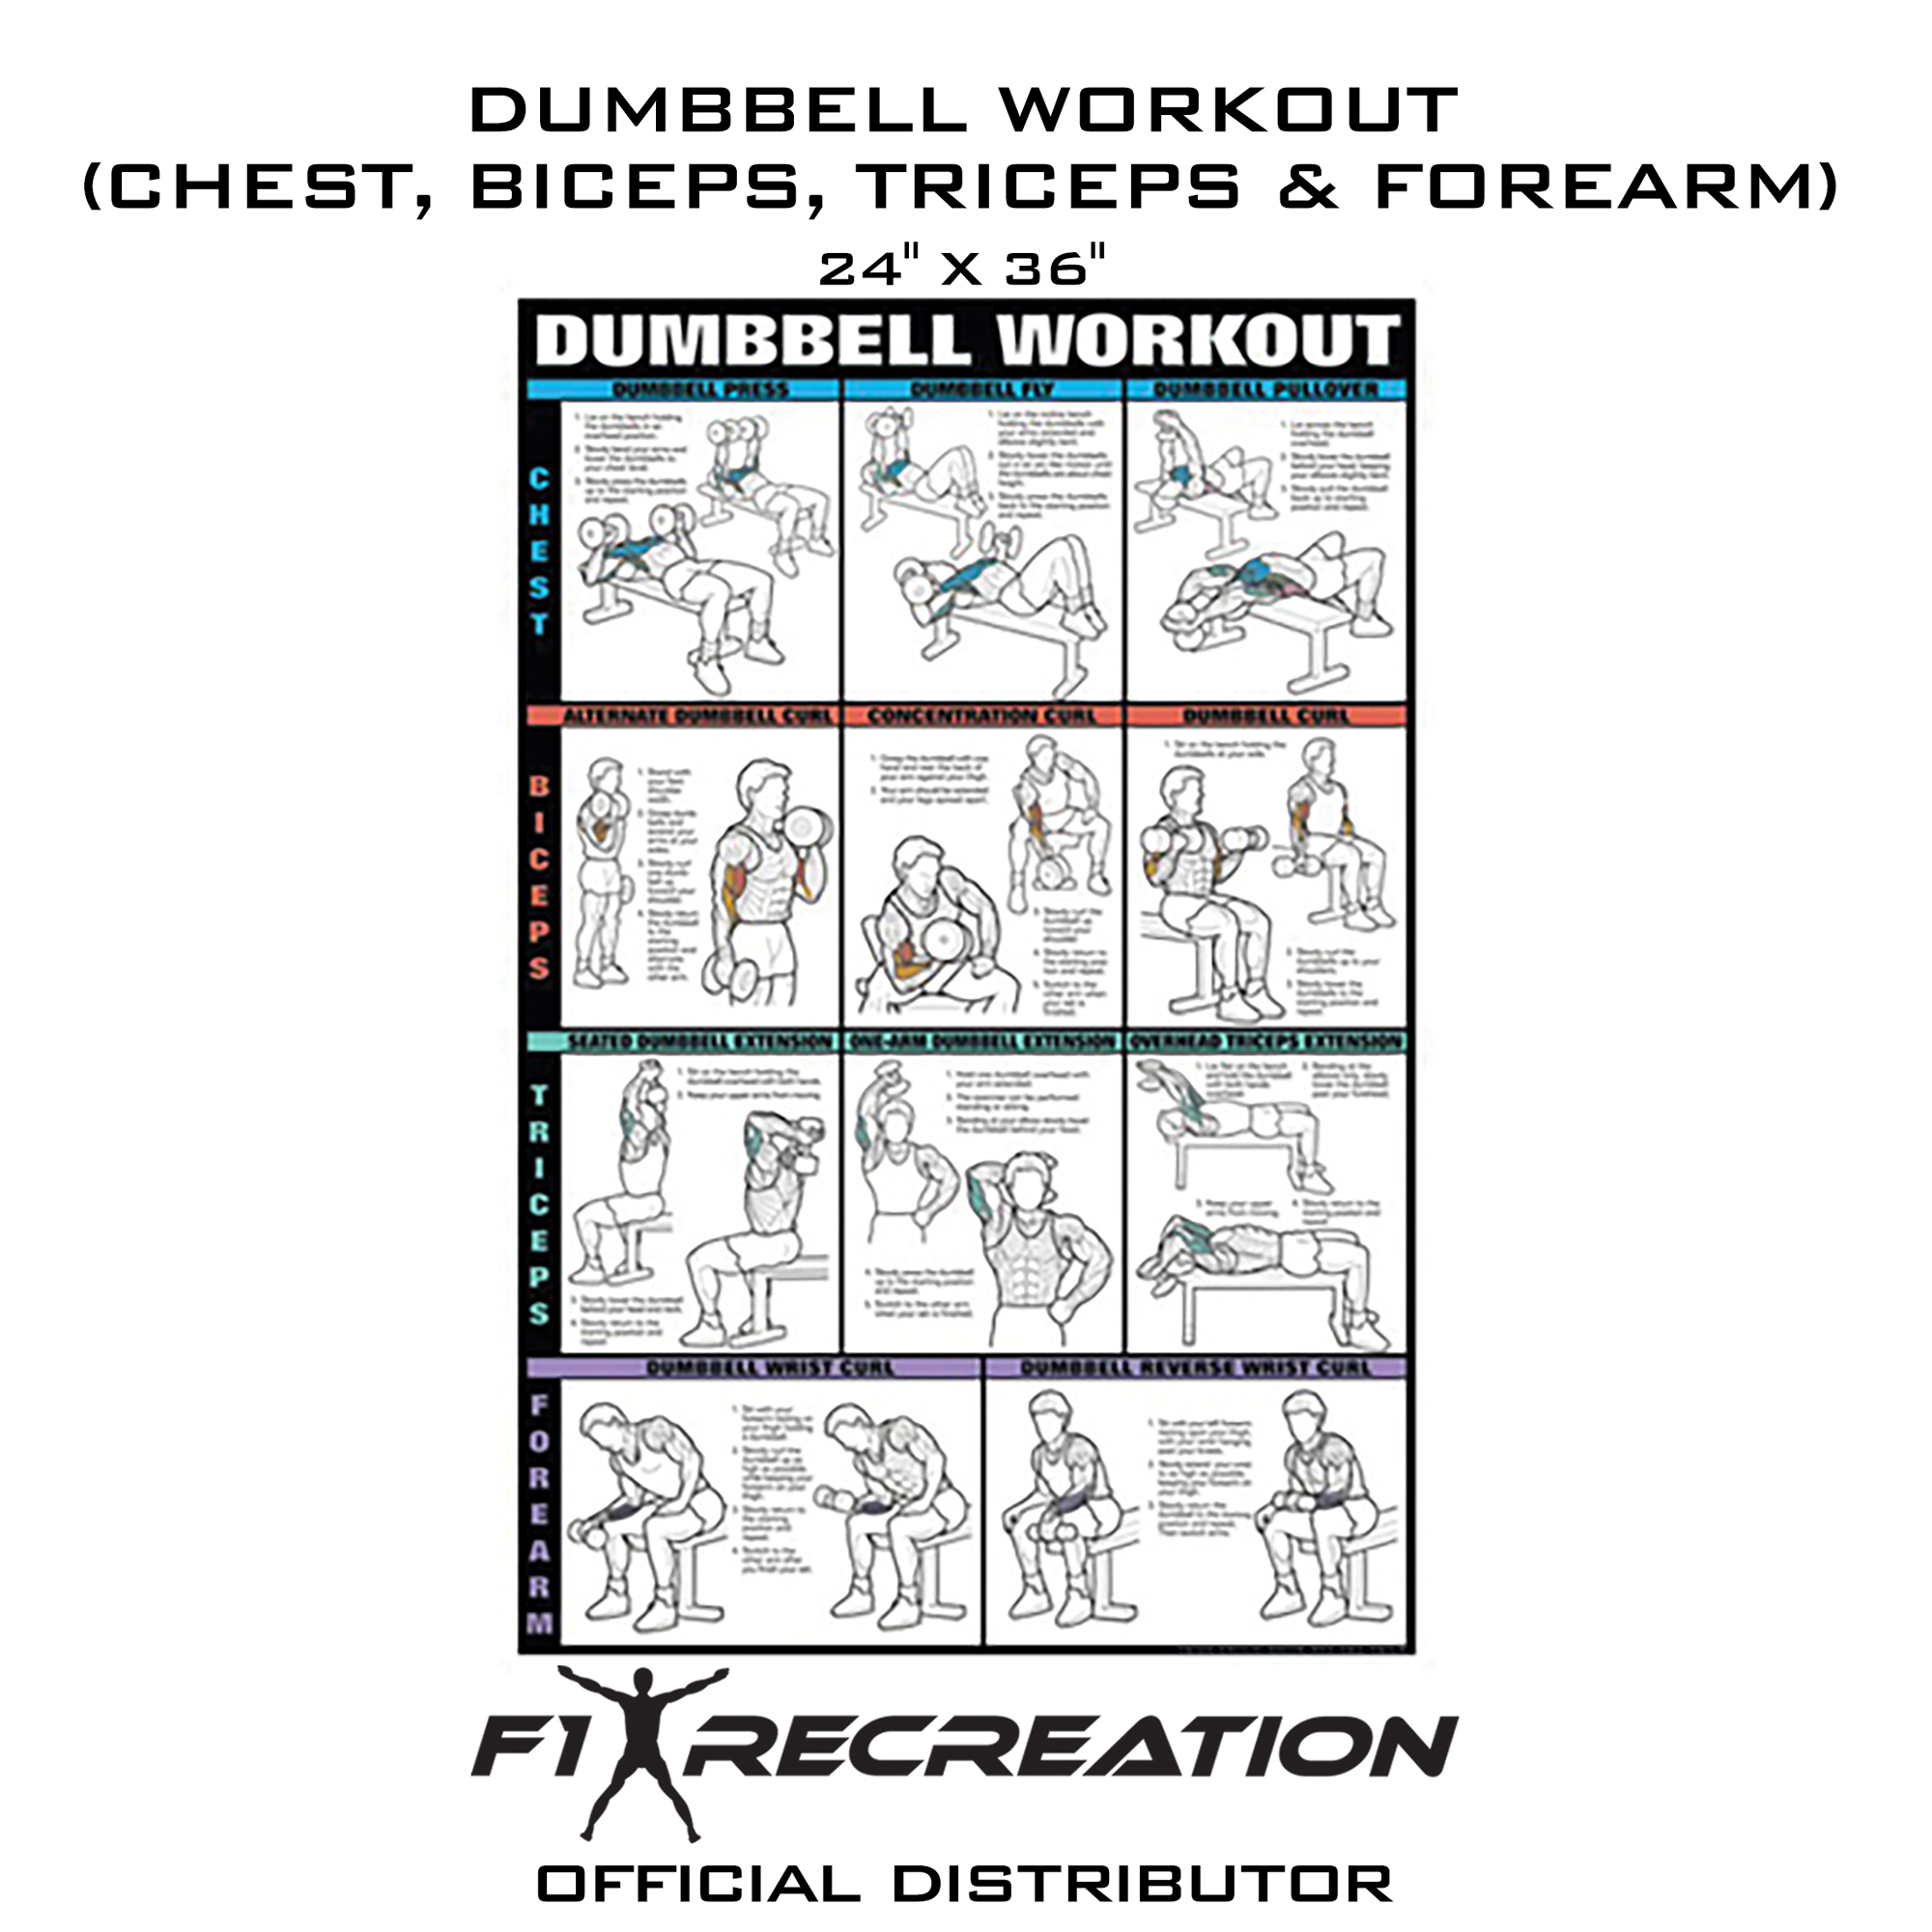 F1 Recreation Original Dumbbell Workout Poster (Chest, Biceps, Triceps &  Forearm) NFC12B